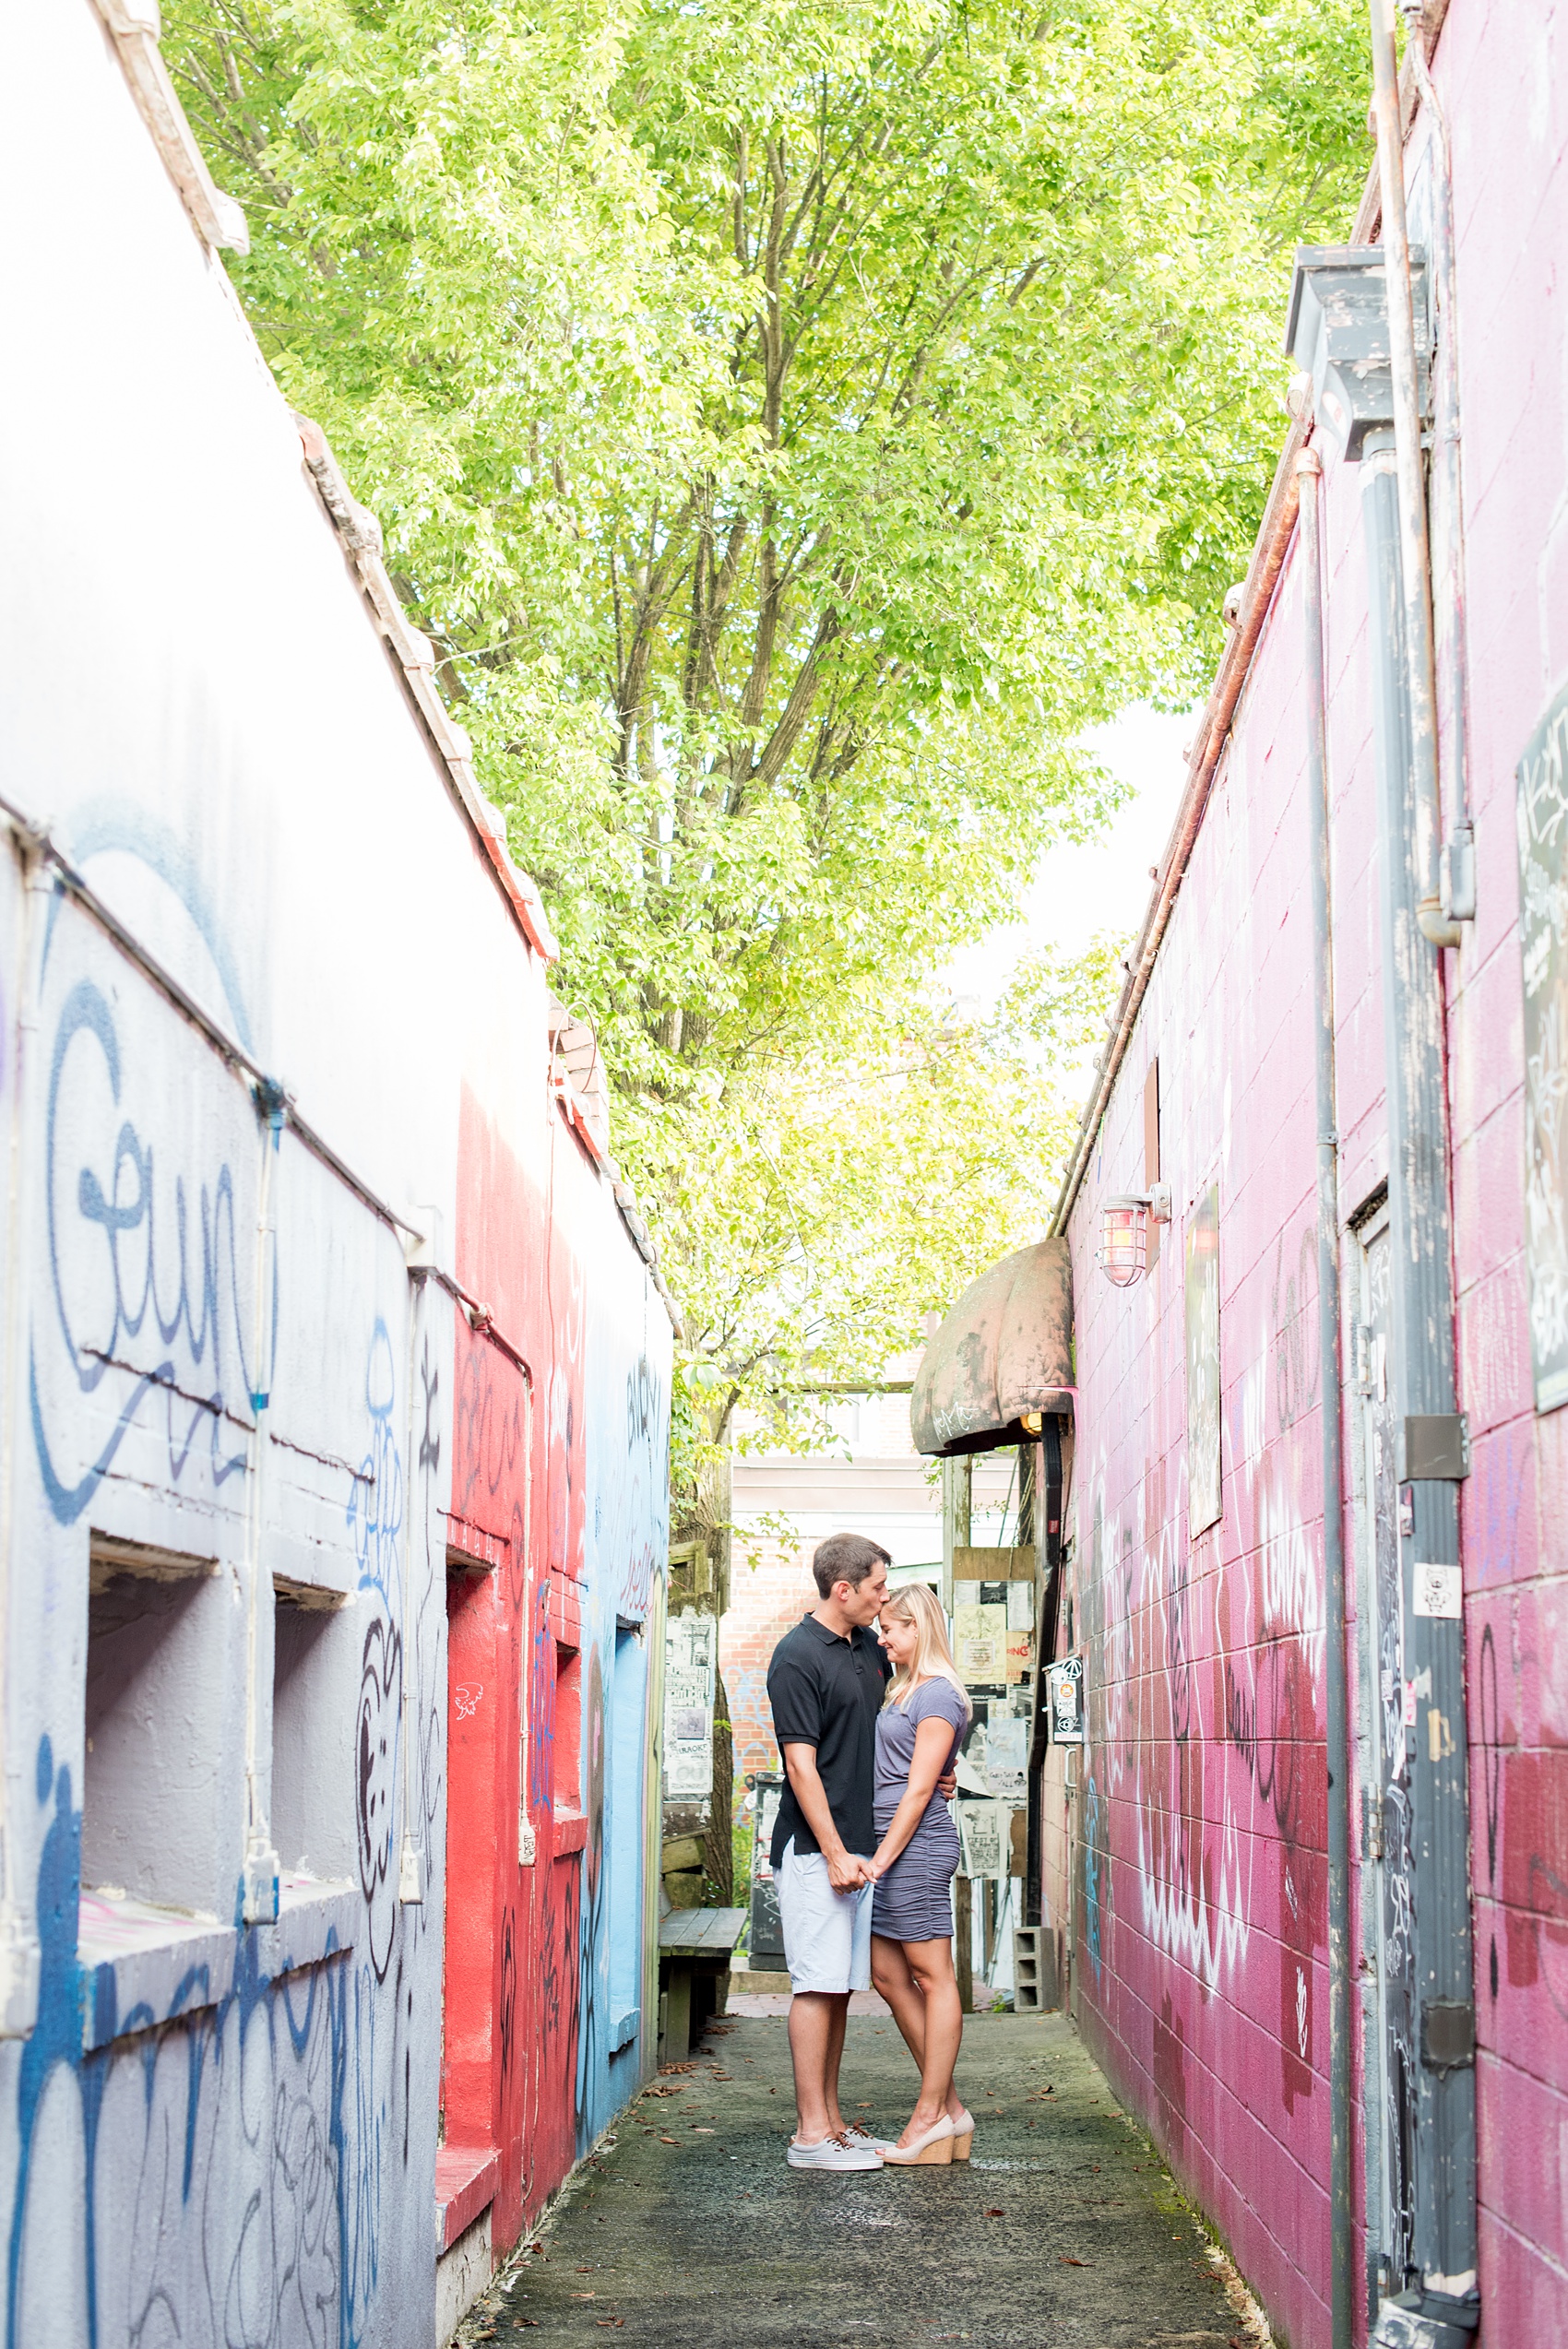 Mikkel Paige Photography pictures of a colorful engagement session in Chapel Hill North Carolina. The bride and groom walk through a vibrant graffiti tunnel.